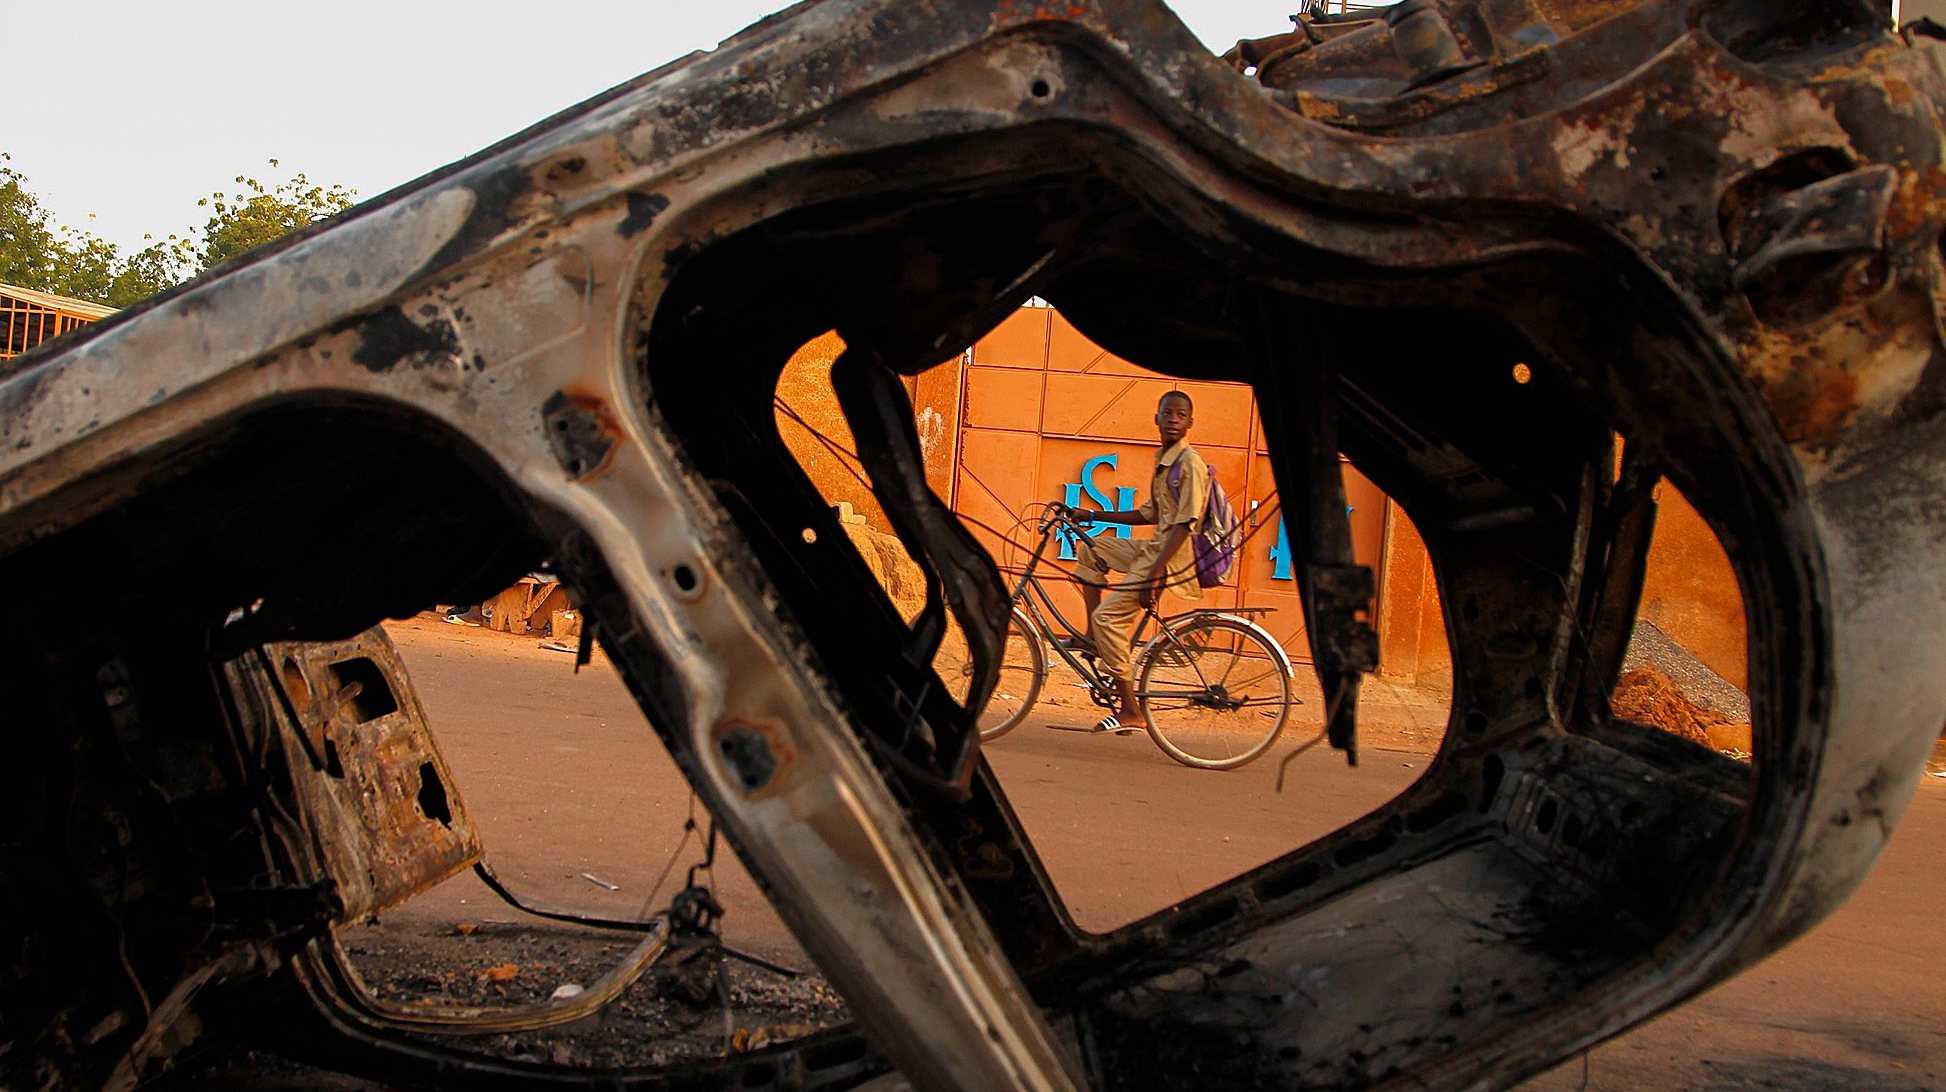 epaselect epa04474287 A boy from Burkina Faso cycles past burned vehicles damaged during violent demonstrations by pro democracy protesters that led to the resignation of President Blaise Compaore in Ouagadougou, Burkina Faso, 03 November 2014. President Blaise Compaore resigned on 31 October 2014 following the violent protests against his bid to change the constitution to extend his rule of 27 years. After a brief claim to power by army General Honore Traore a power struggle ensued with Presidential guard commander Lieutenat-Colonel Isaac Zide being appointed as transitional leader. Thousands of protesters took to the Place de la Nation on 02 November in protest against the military rule.  EPA/LEGNAN KOULA